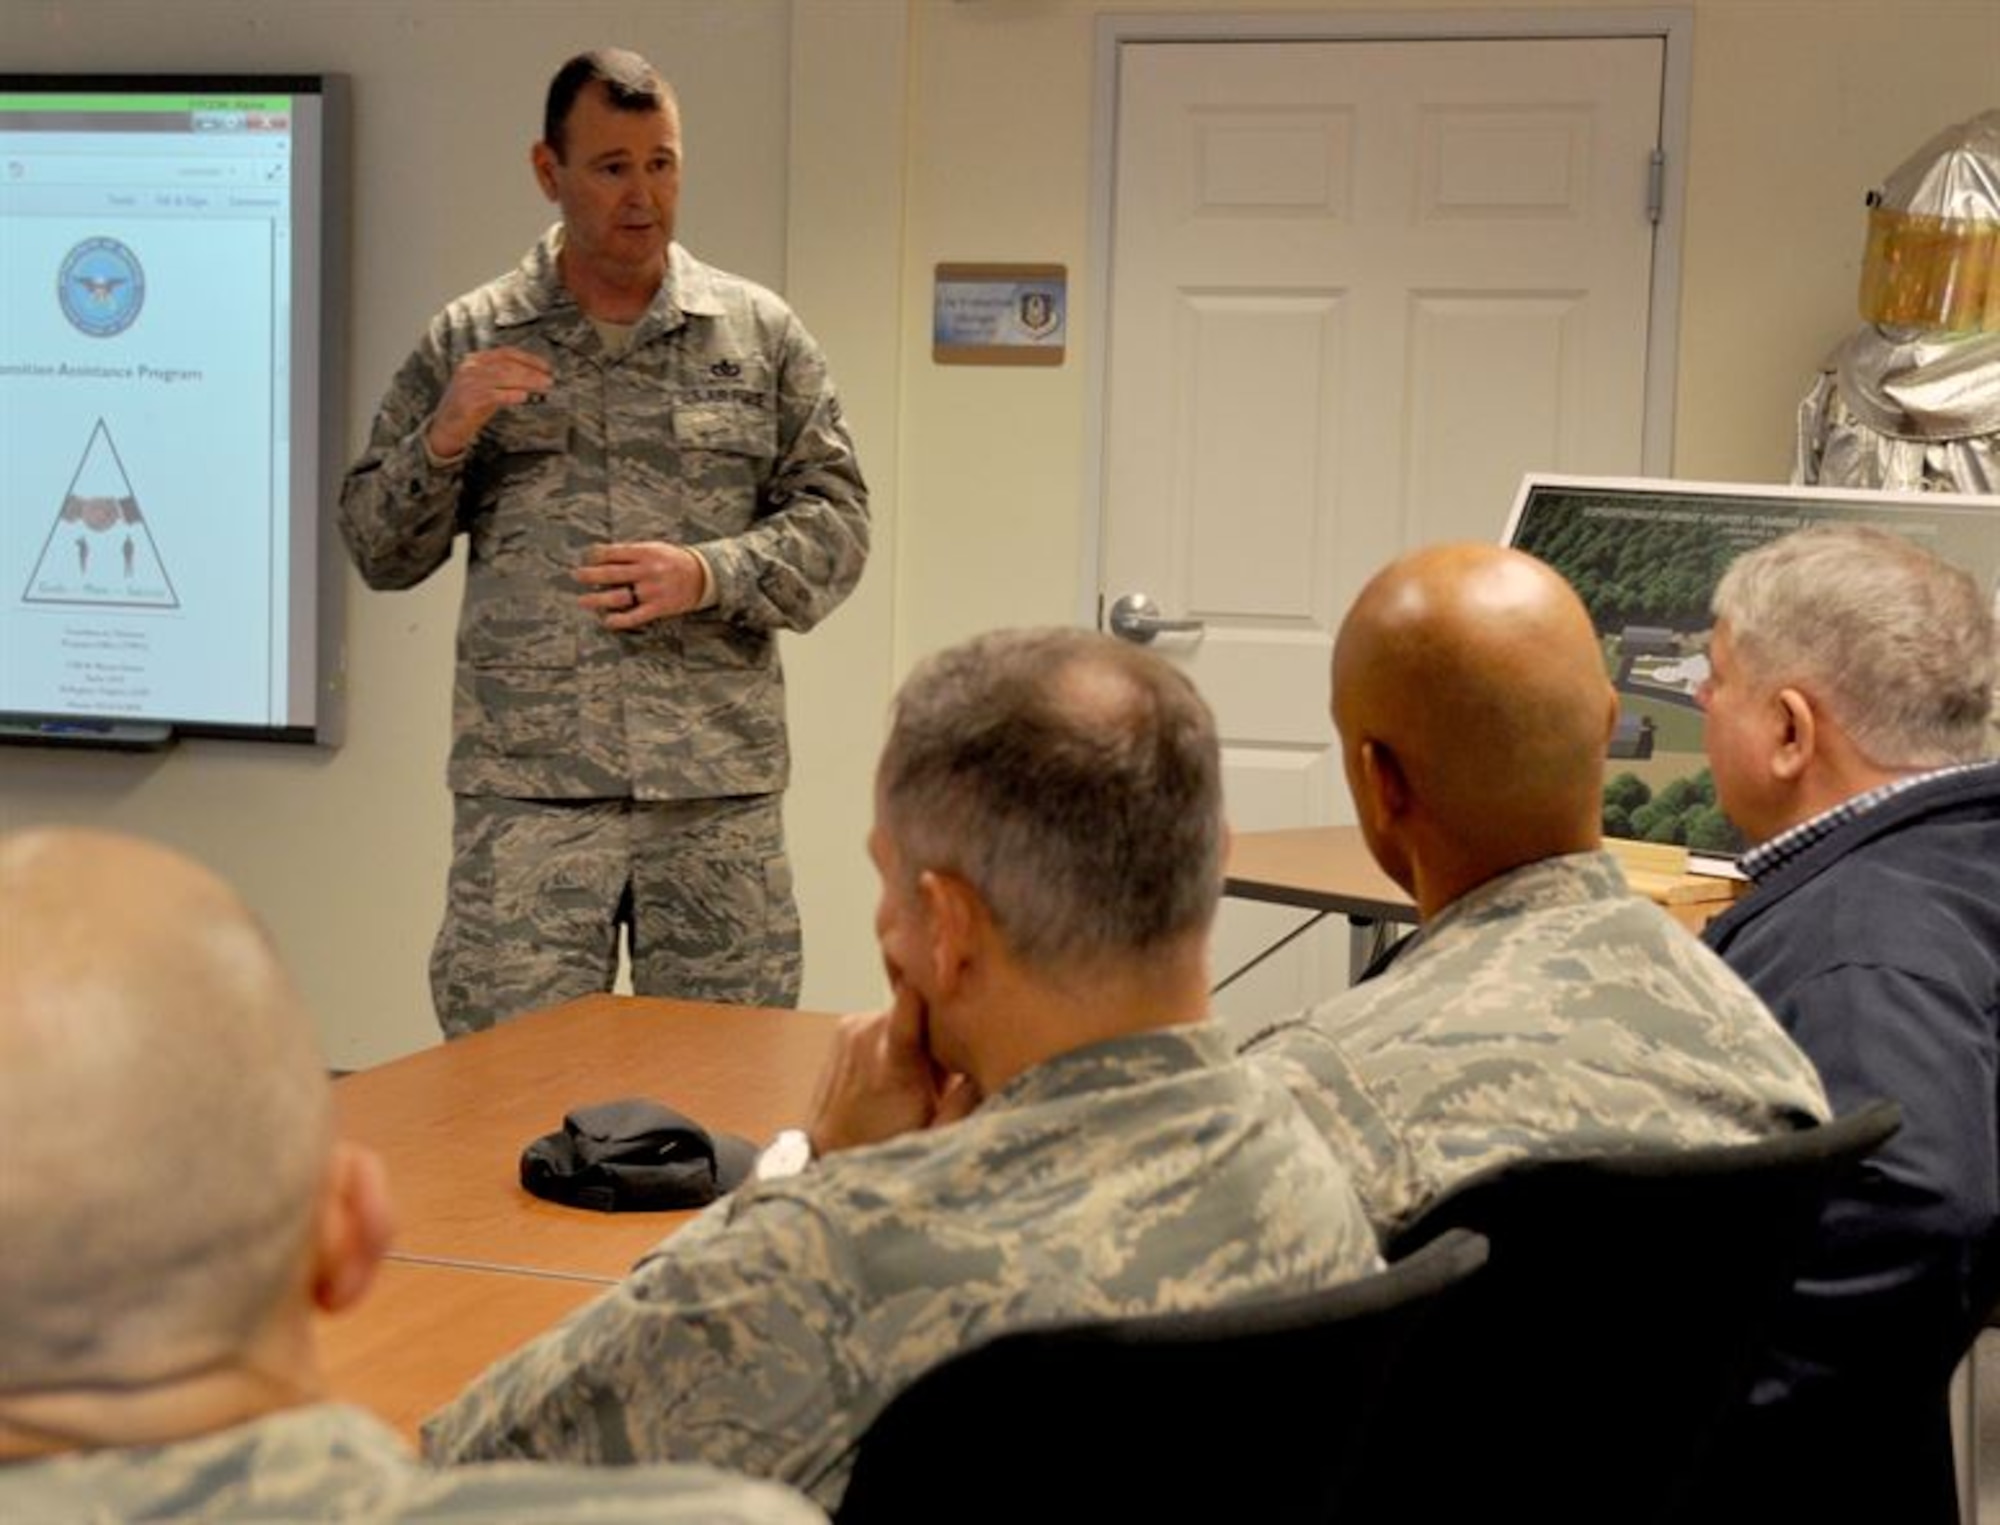 Chief Master Sgt. Trevor Shattuck, Air Force Civil Engineer Center reserve career field manager at Tyndall Air Force Base, Florida, gives a presentation to members of PTDI prior to the organization granting certification to the Tractor Trailer Training, or 3T, program at Dobbins Air Reserve Base, Georgia. (U.S. Air Force photo/Senior Airman Daniel Phelps/released)